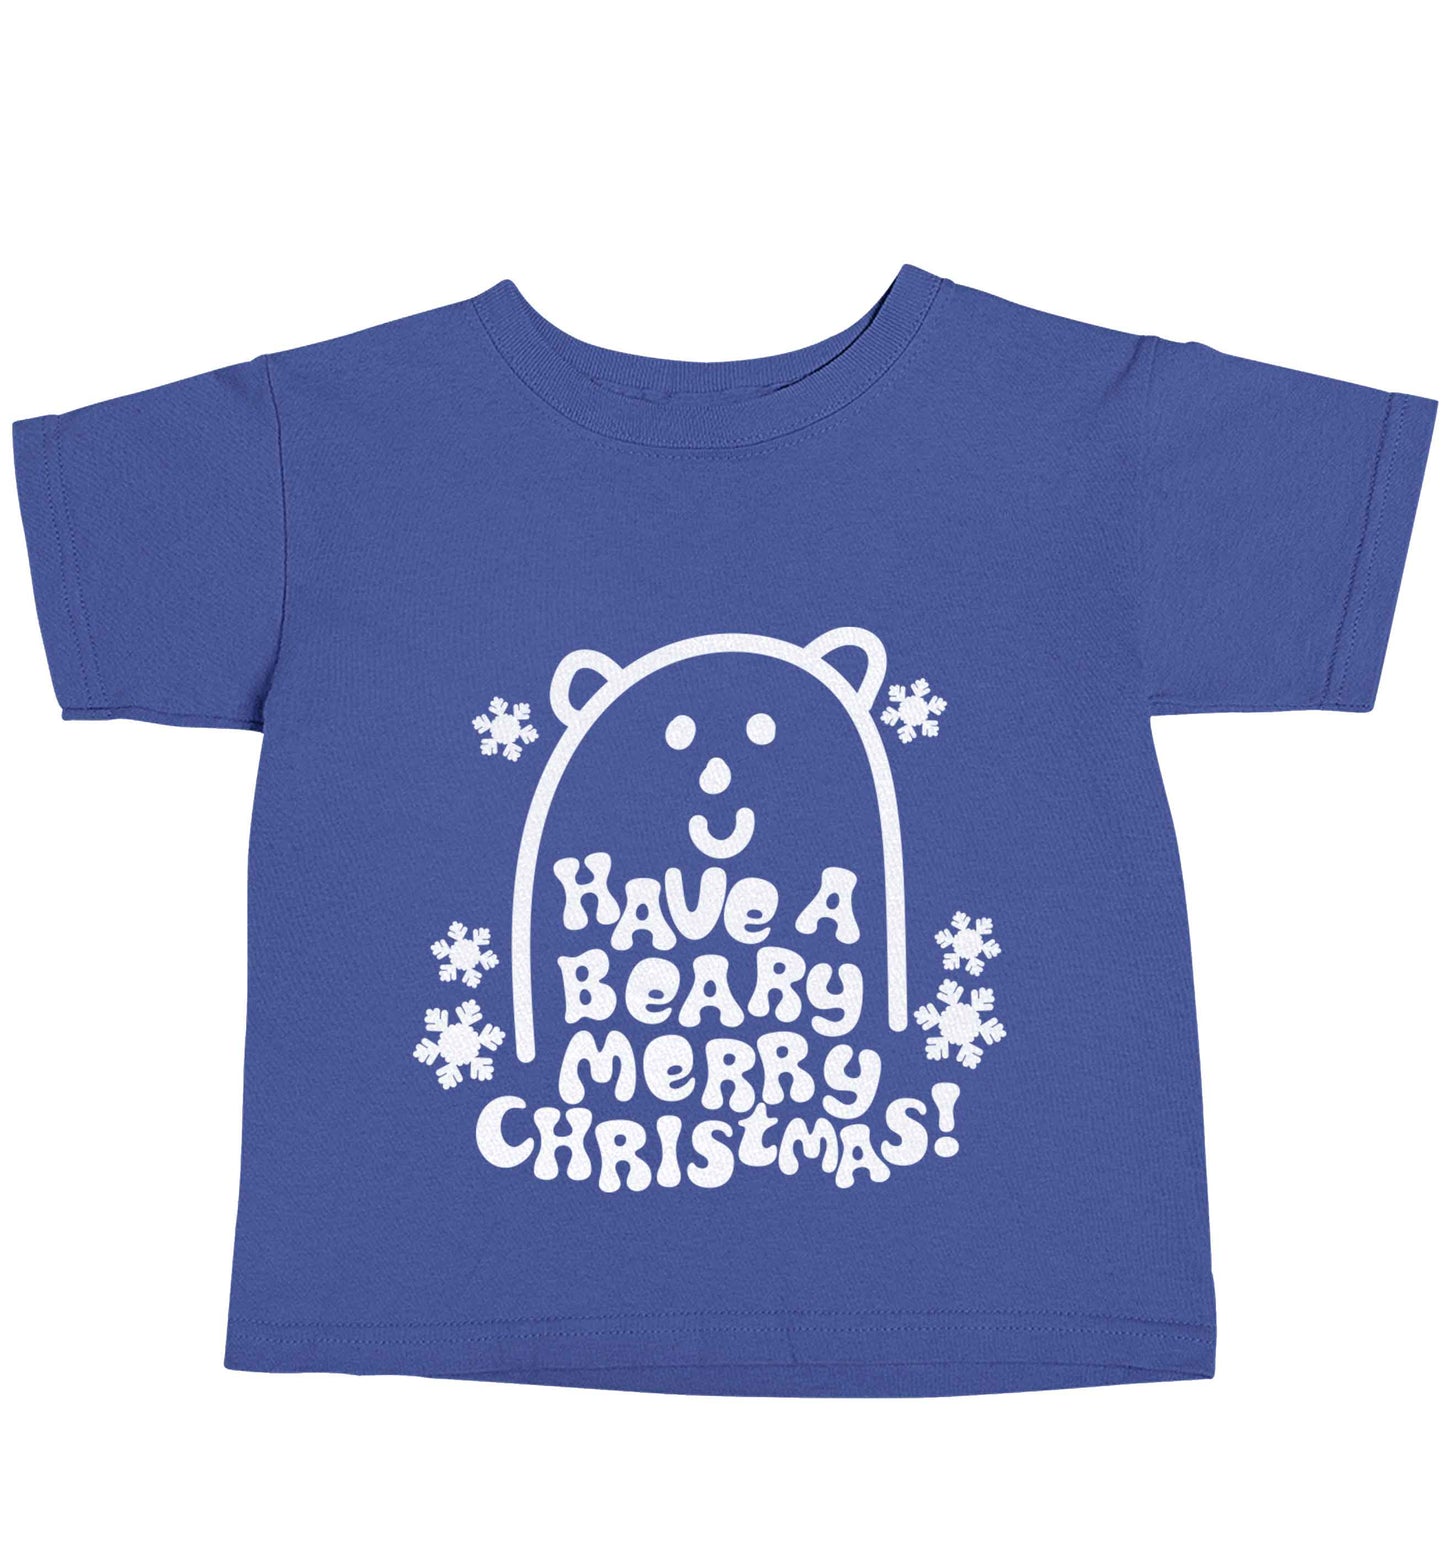 Save The Polar Bears blue baby toddler Tshirt 2 Years